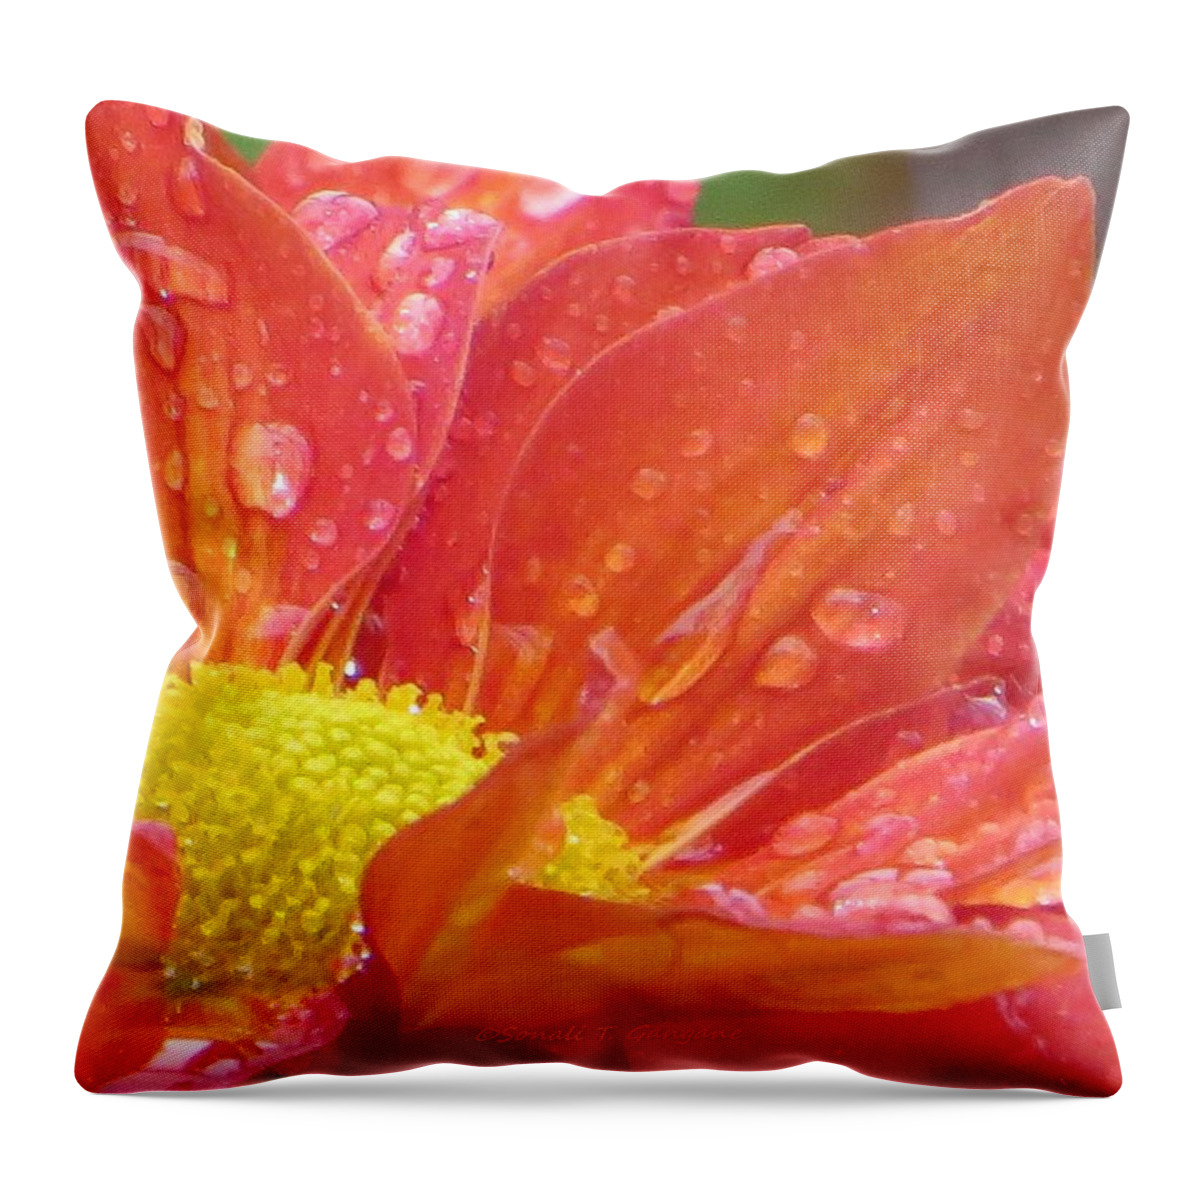 Pearls Throw Pillow featuring the photograph Red Craft by Sonali Gangane